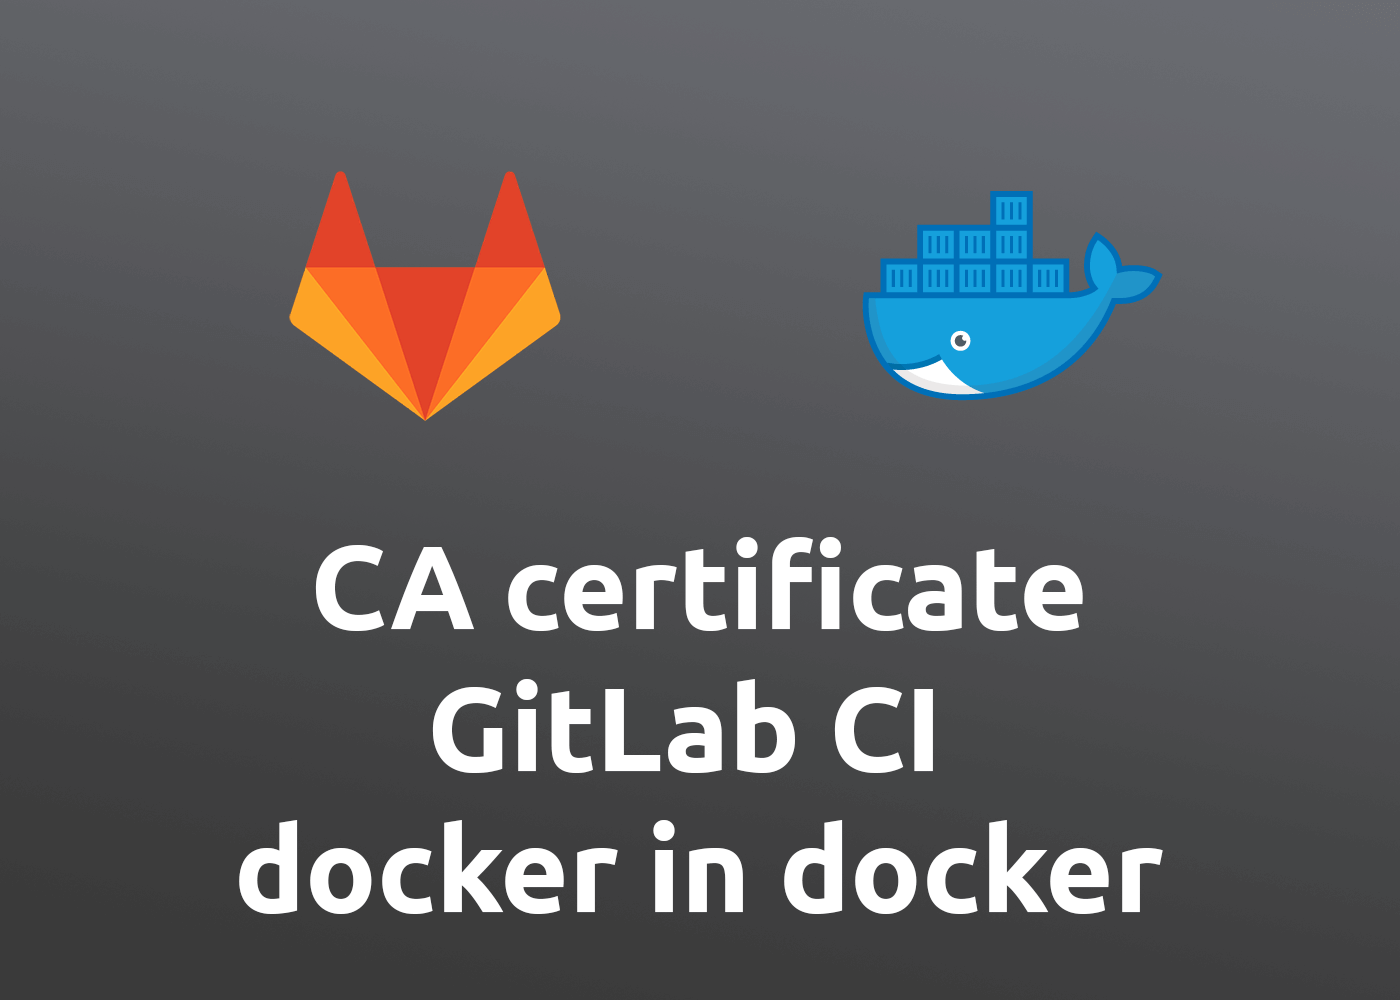 [How-to] Own CA Certificate in GitLab CI with dind service (docker-in-docker)